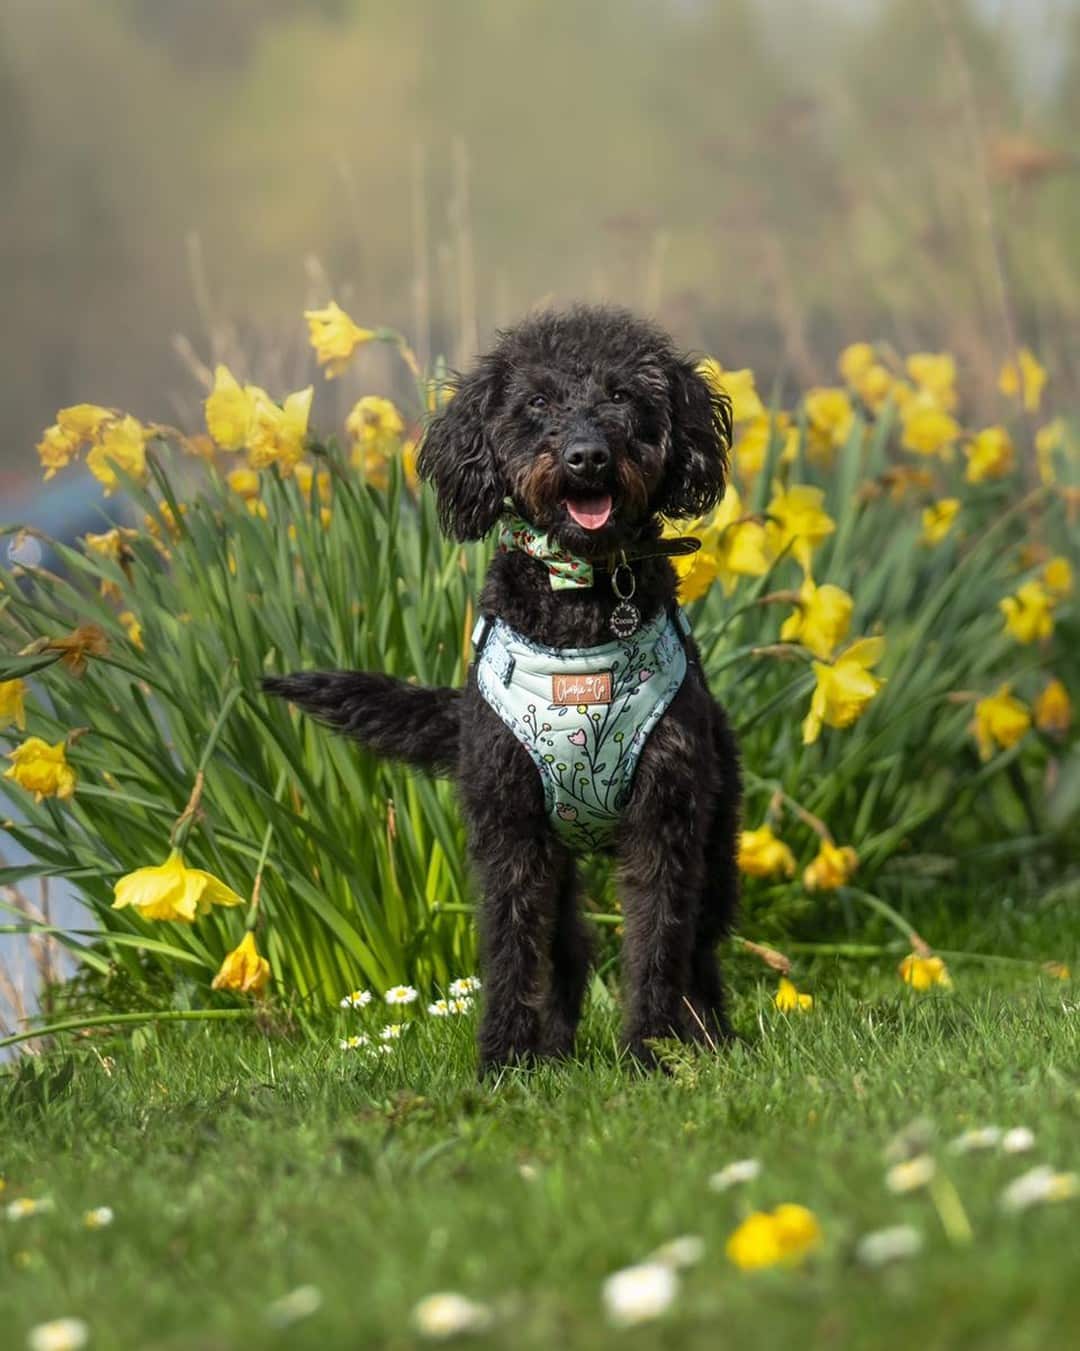 This was the beautiful Cocoa that I had the privilege to photograph over the weekend. She is a mini Labradoodle and how cute is she!!
It was an interesting shoot with lots of different scenery from sitting in the flowers, to woodland and even at a church!

.
.
.
.
#dogportraits #dogsofinstagram #dogportrait #petportraits #dogs #petportrait #dog #petportraitartist #dogart #dogphotography #petsofinstagram #pets #petphotography #dogstagram #doglovers #doglover #doglife #dogphotographer #dogoftheday 
#petphotographer #puppy #dogmodel #dogphotoshoot #alandukesphotography #Dogphotographerstoke
#Dogphotographerstaffordshire @petphotographyuk 
#minilabradoodlepuppy #minilabradoodles #minilabradoodlesofinstagram #minilabradoodle